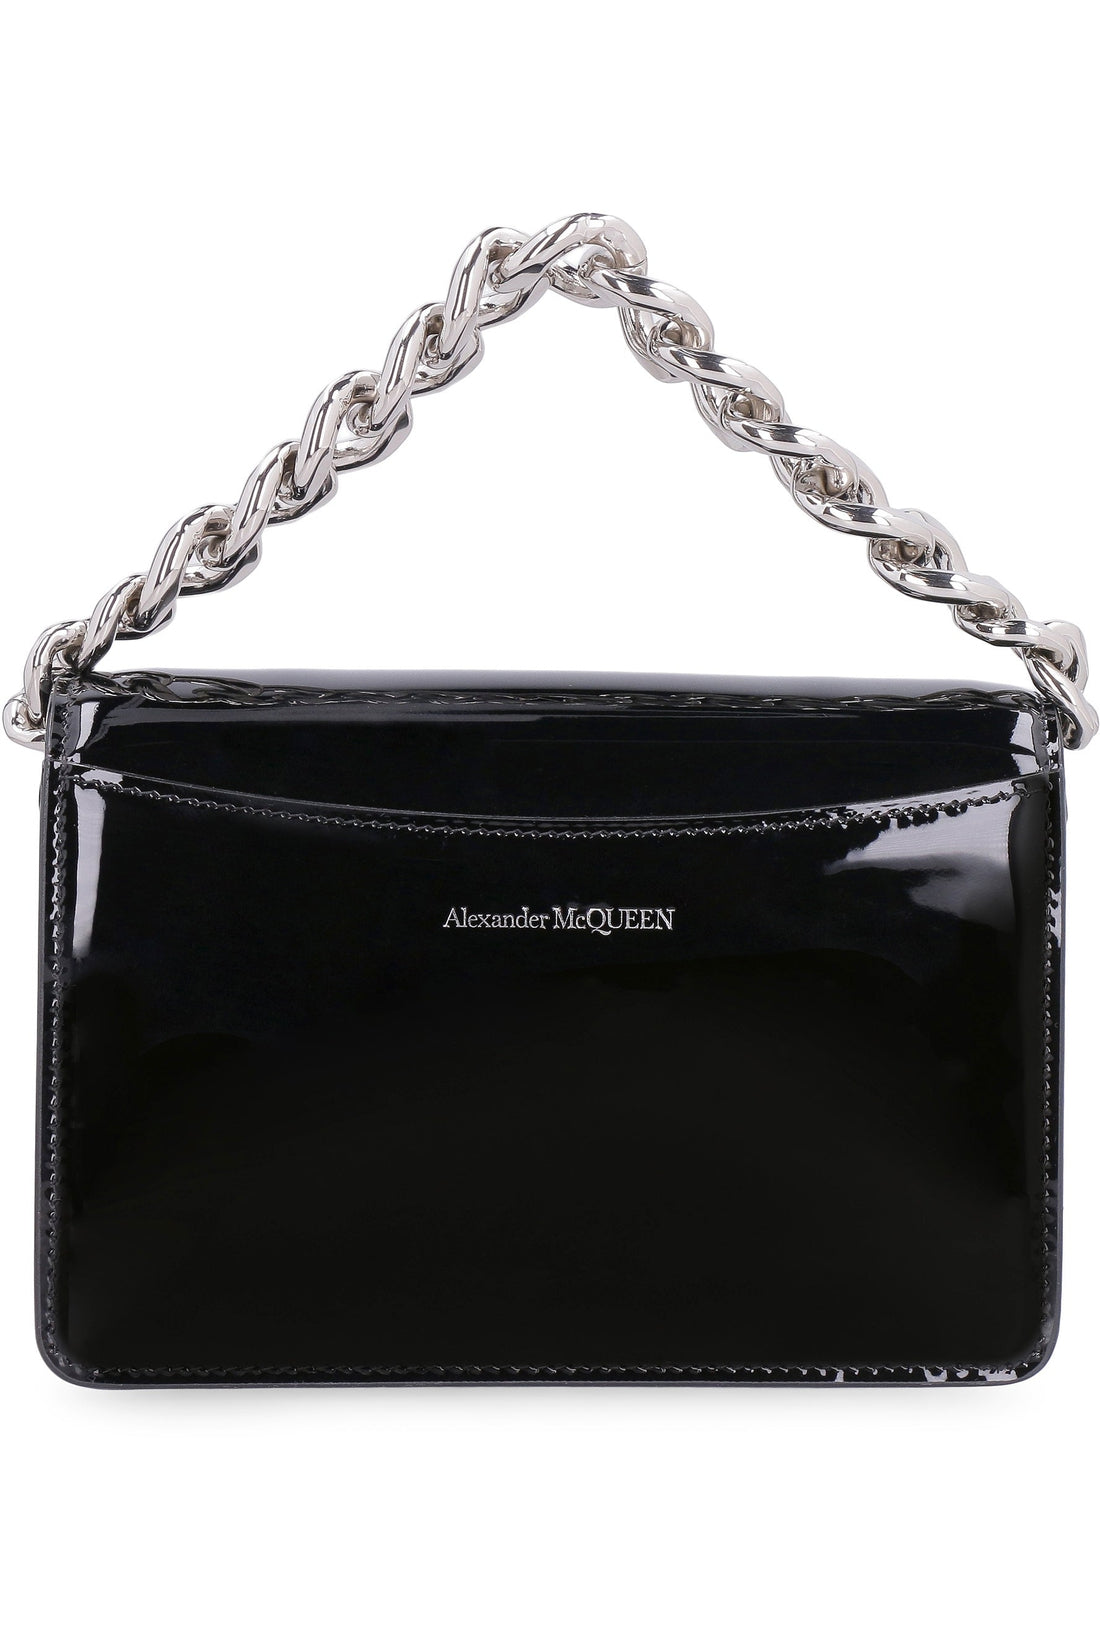 Alexander McQueen-OUTLET-SALE-The Four Ring Mini patent leather bag-ARCHIVIST